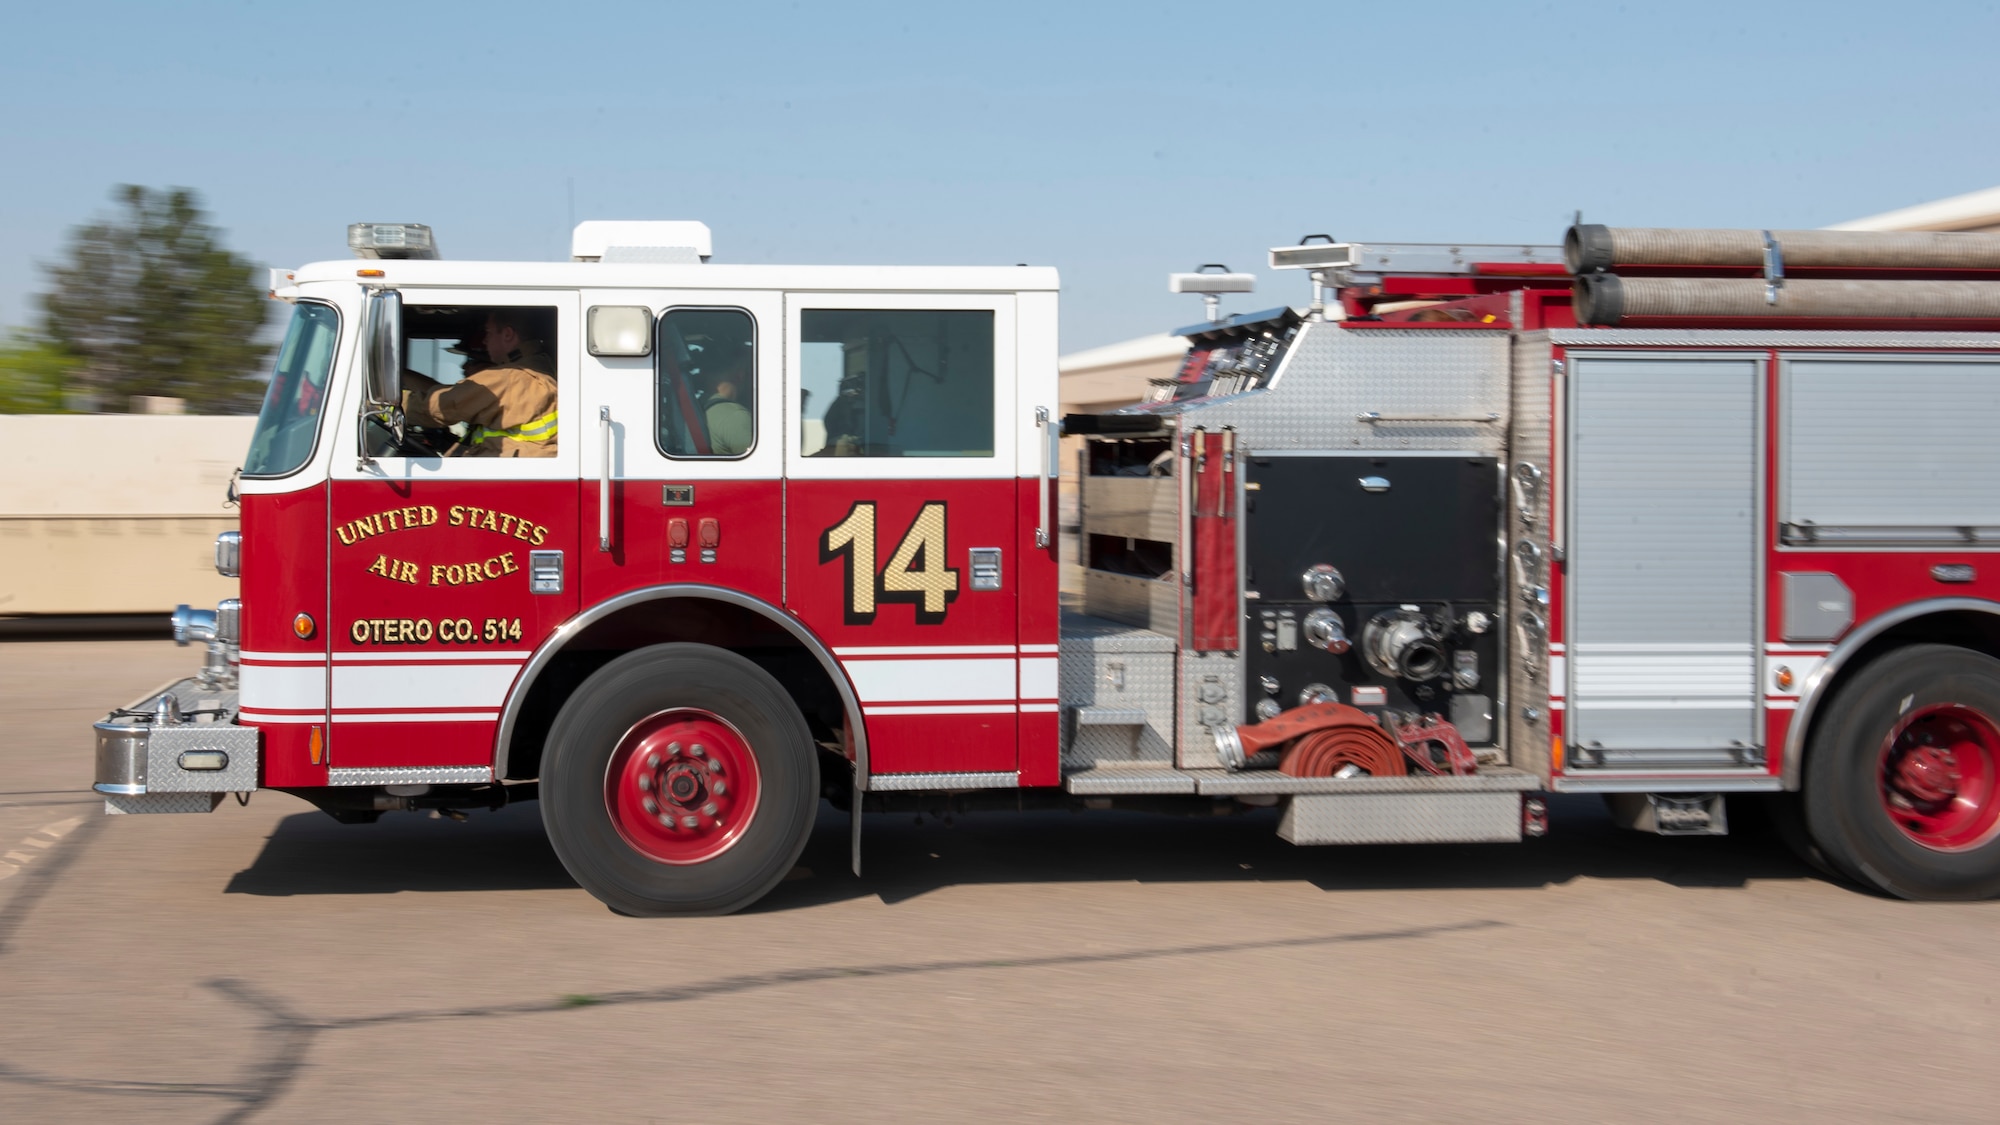 Airmen from the 49th Civil Engineer Squadron drive a fire truck to position it closer to a fire hydrant during an emergency response training exercise, May 19, 2022, on Holloman Air Force Base, New Mexico.